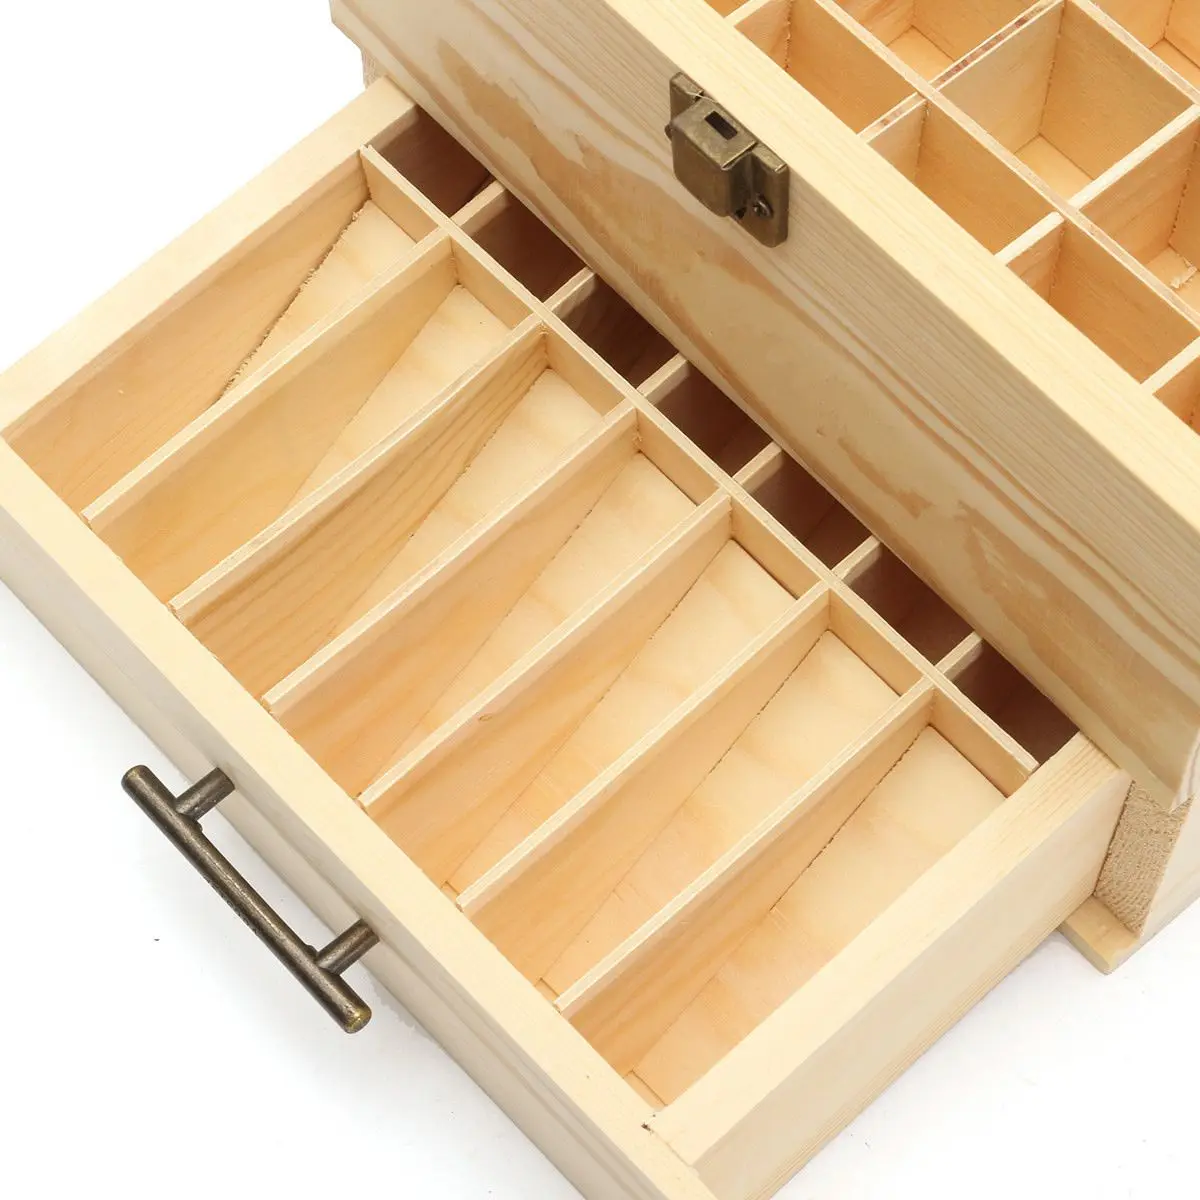 

59 Slots Essential Oil Carrying Case Aromatherapy Wooden Storage Box Organizer Container Jewelry Treasure Storage 3 Tier 3 Layer